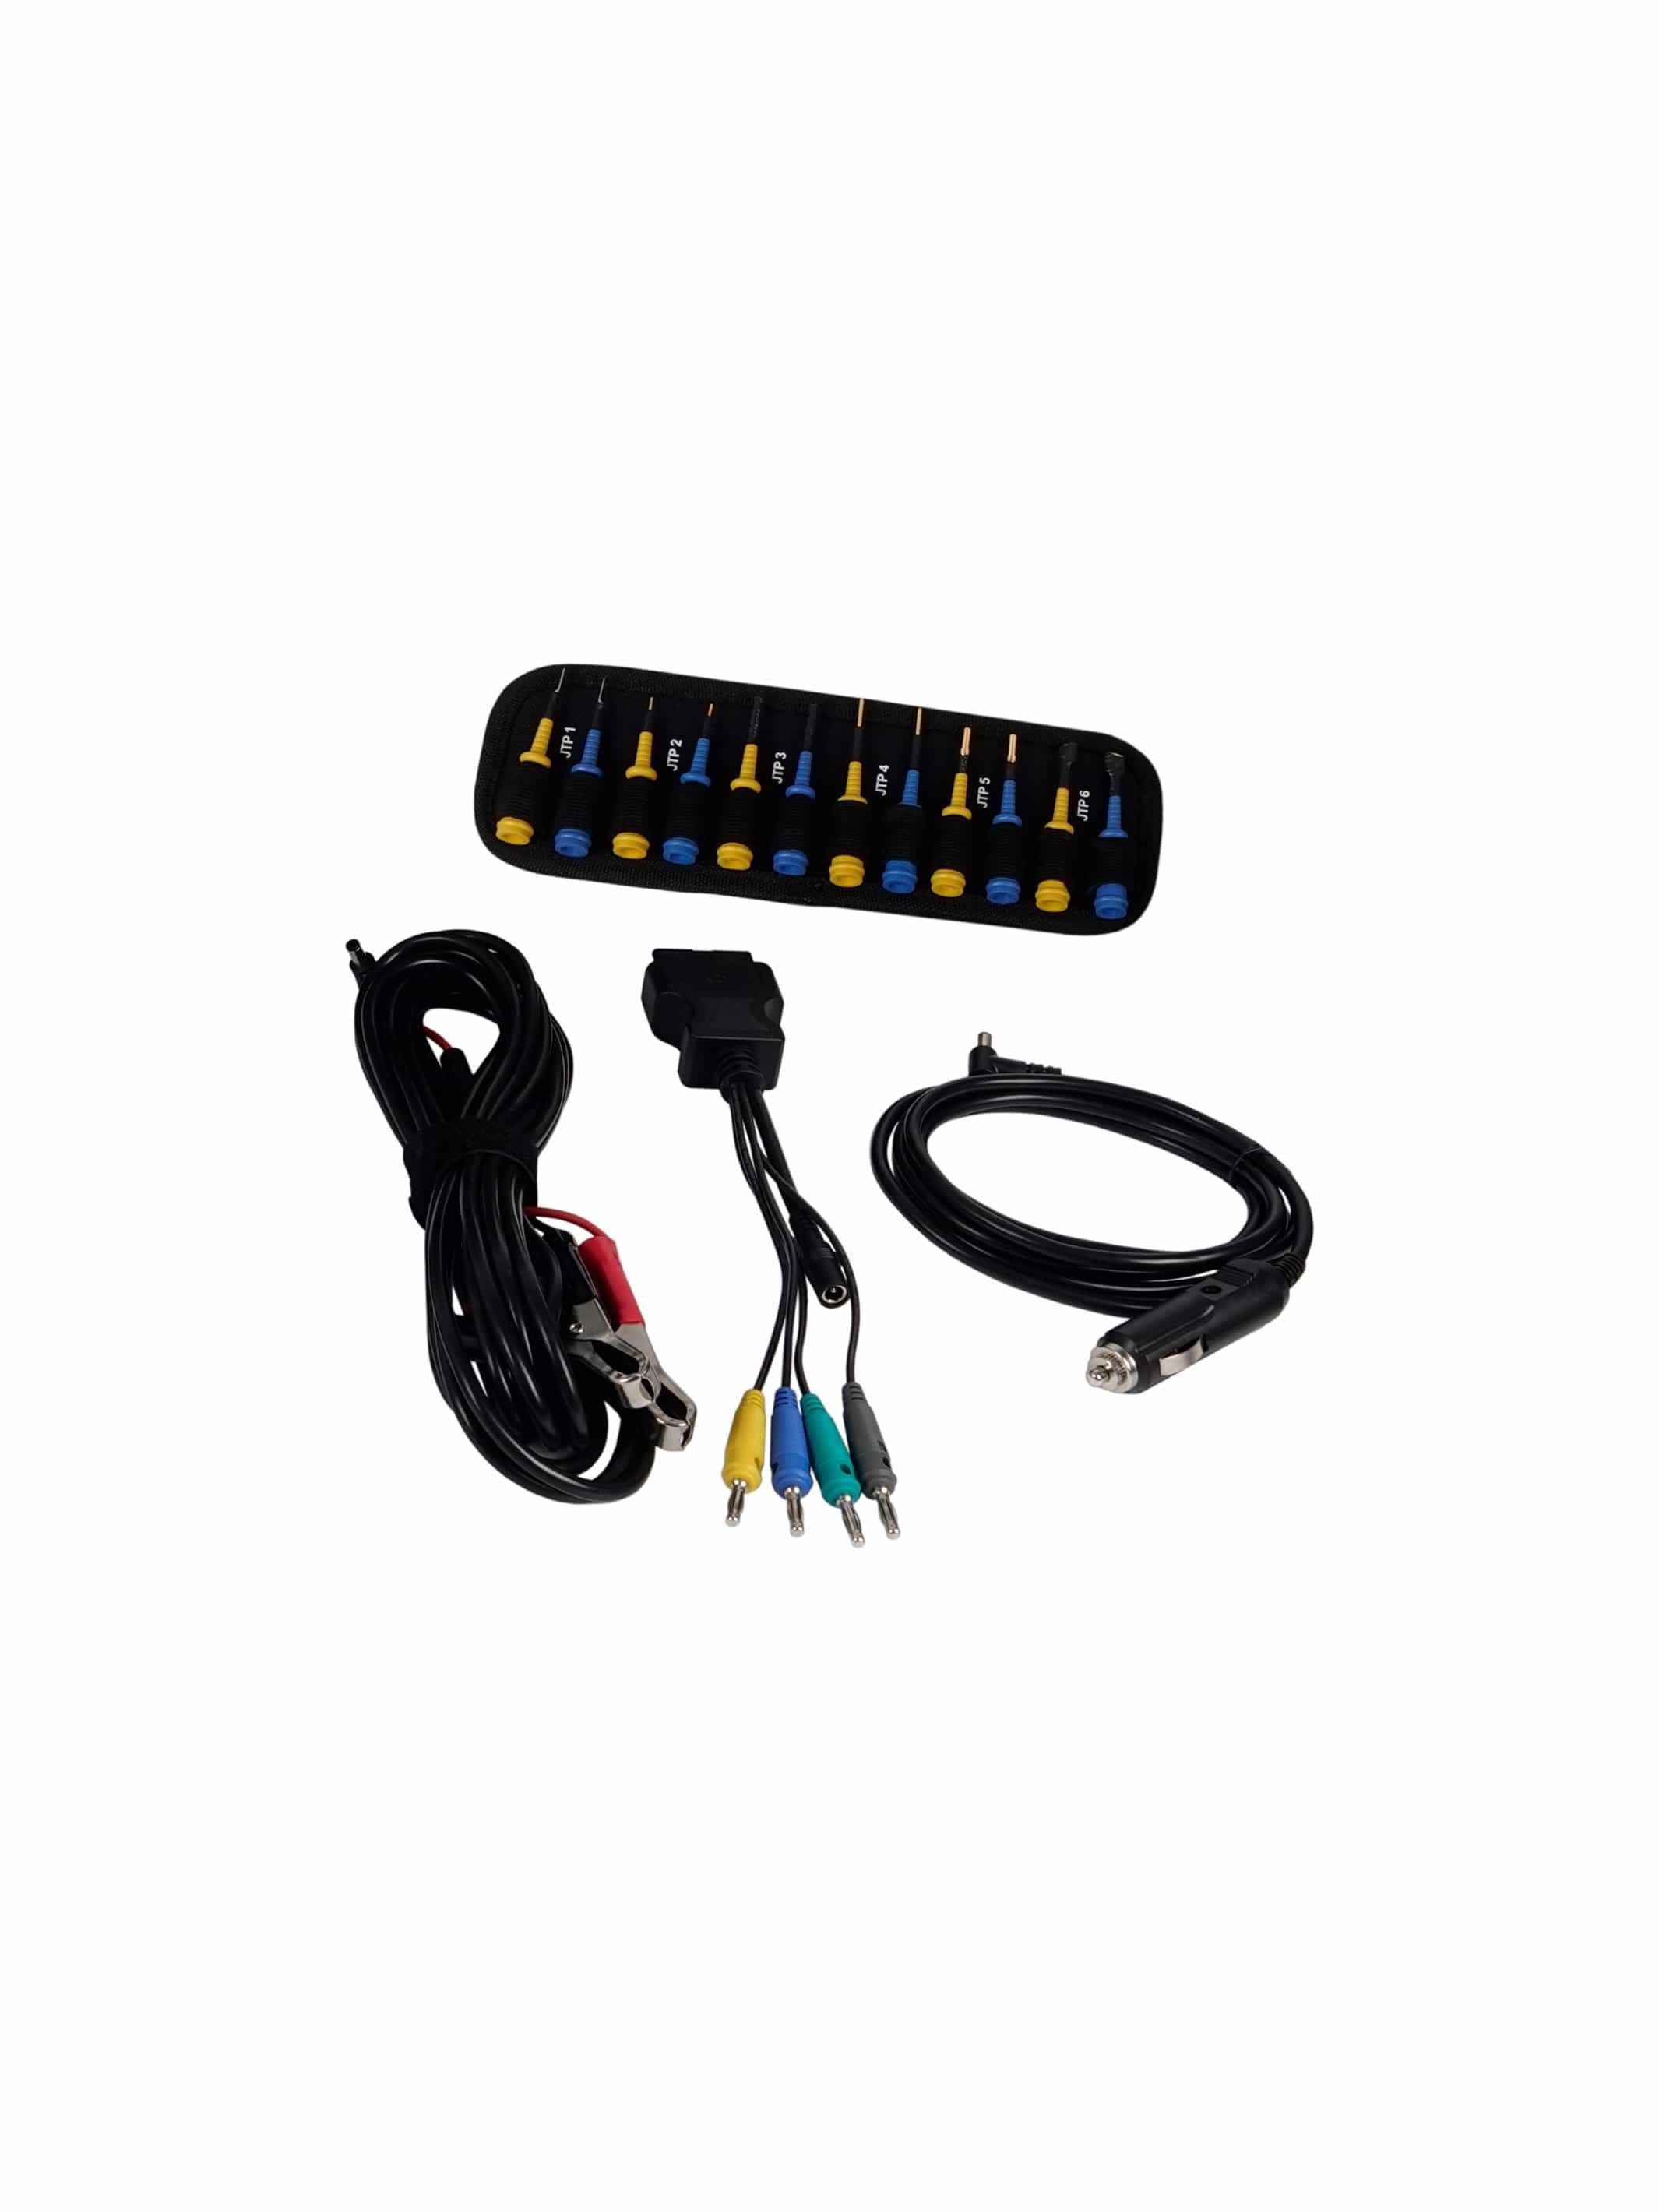 Multipin Kit - Bundle - Jaltest Deluxe Agricultural, Commercial Vehicle & Construction, MH, Power Systems Diagnostic Kit